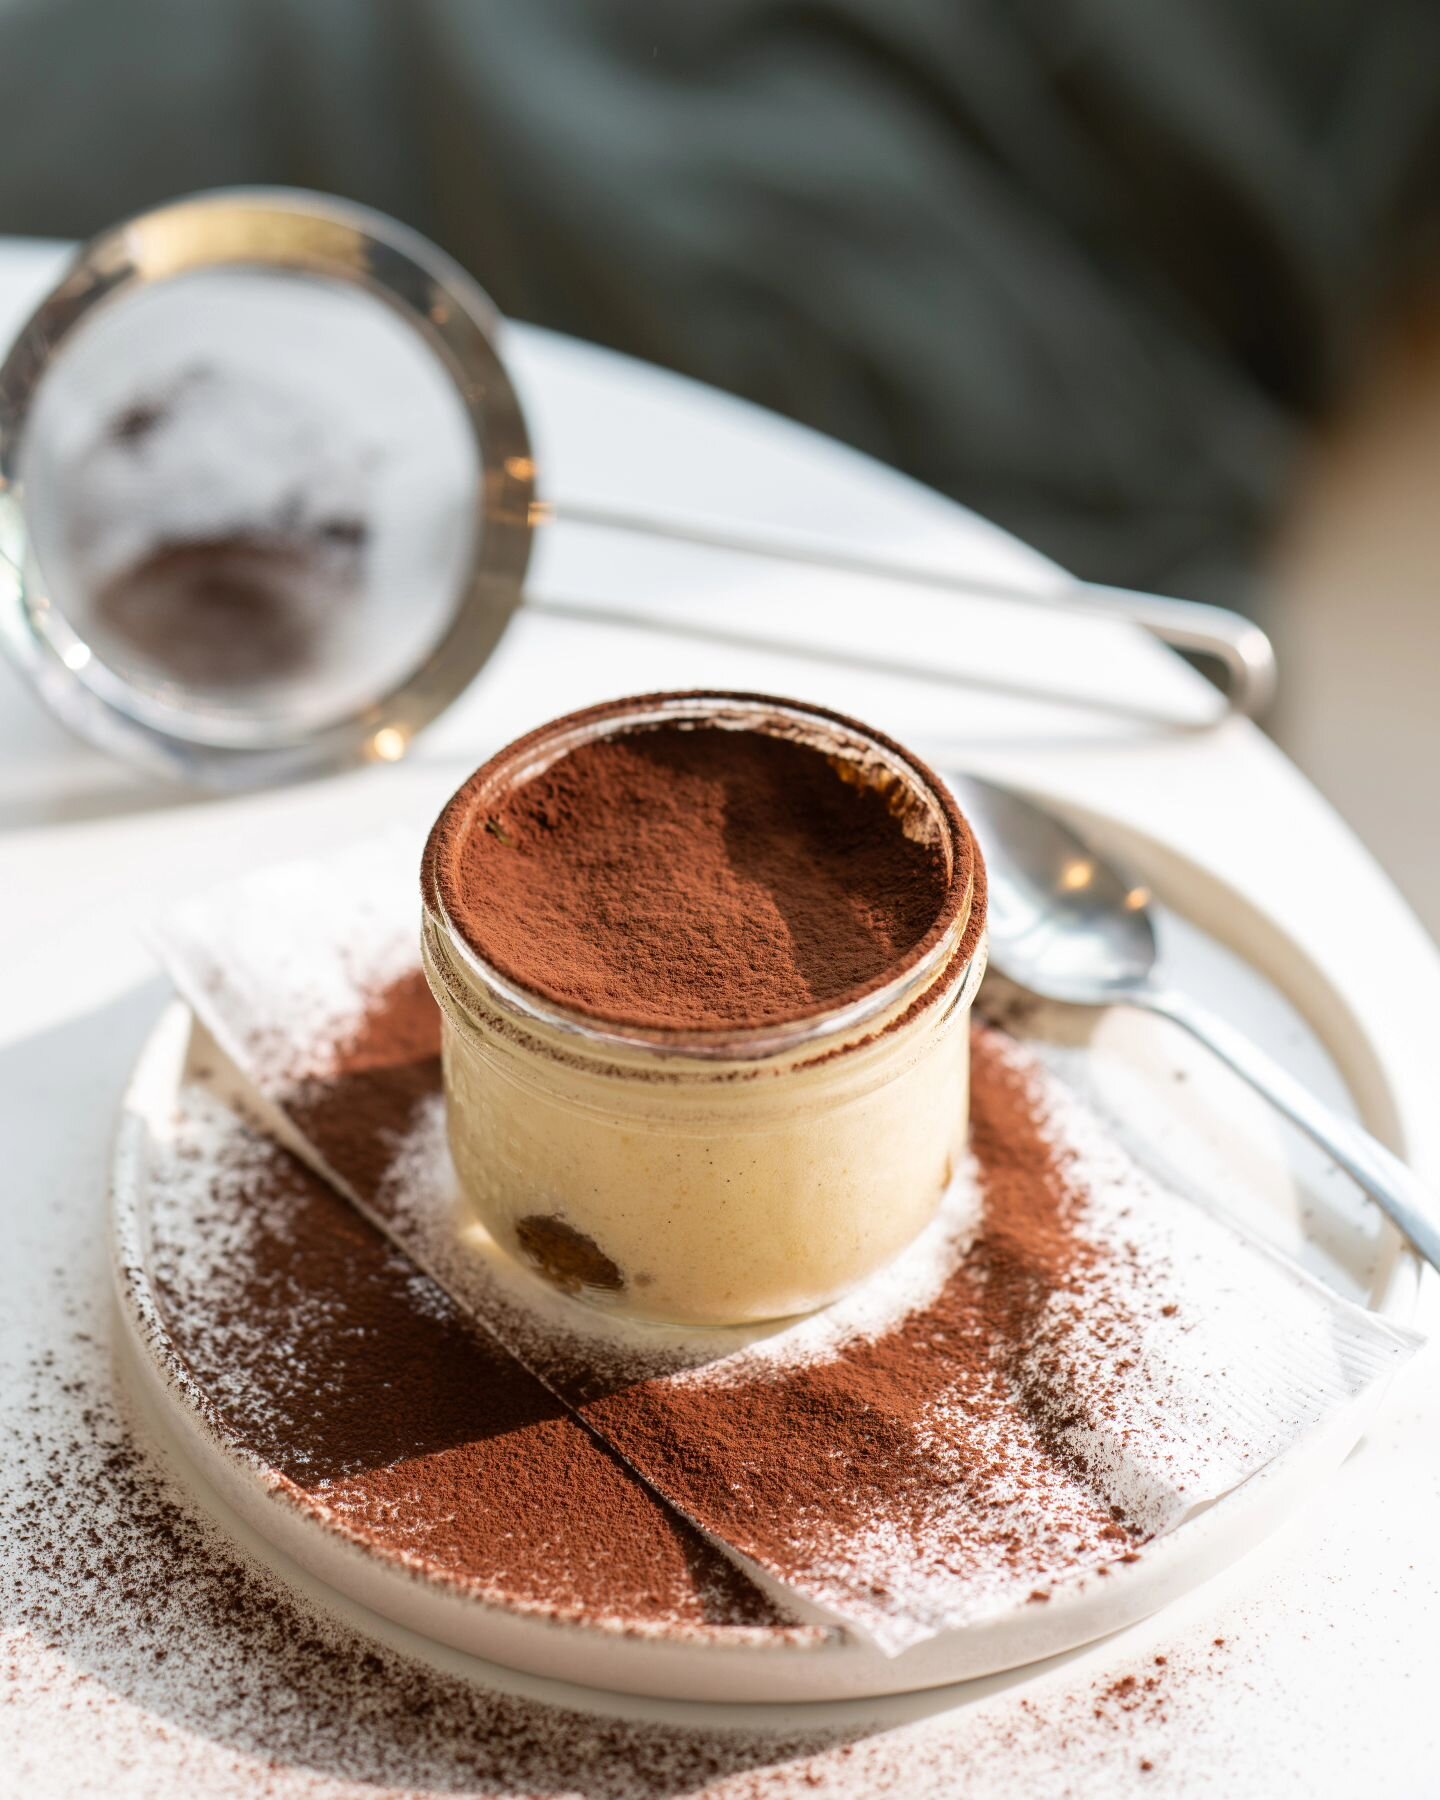 Tiramisu is now available at Redwood, made with speciality coffee and it's 😋😍

Redwood Desserts is growing 🥳